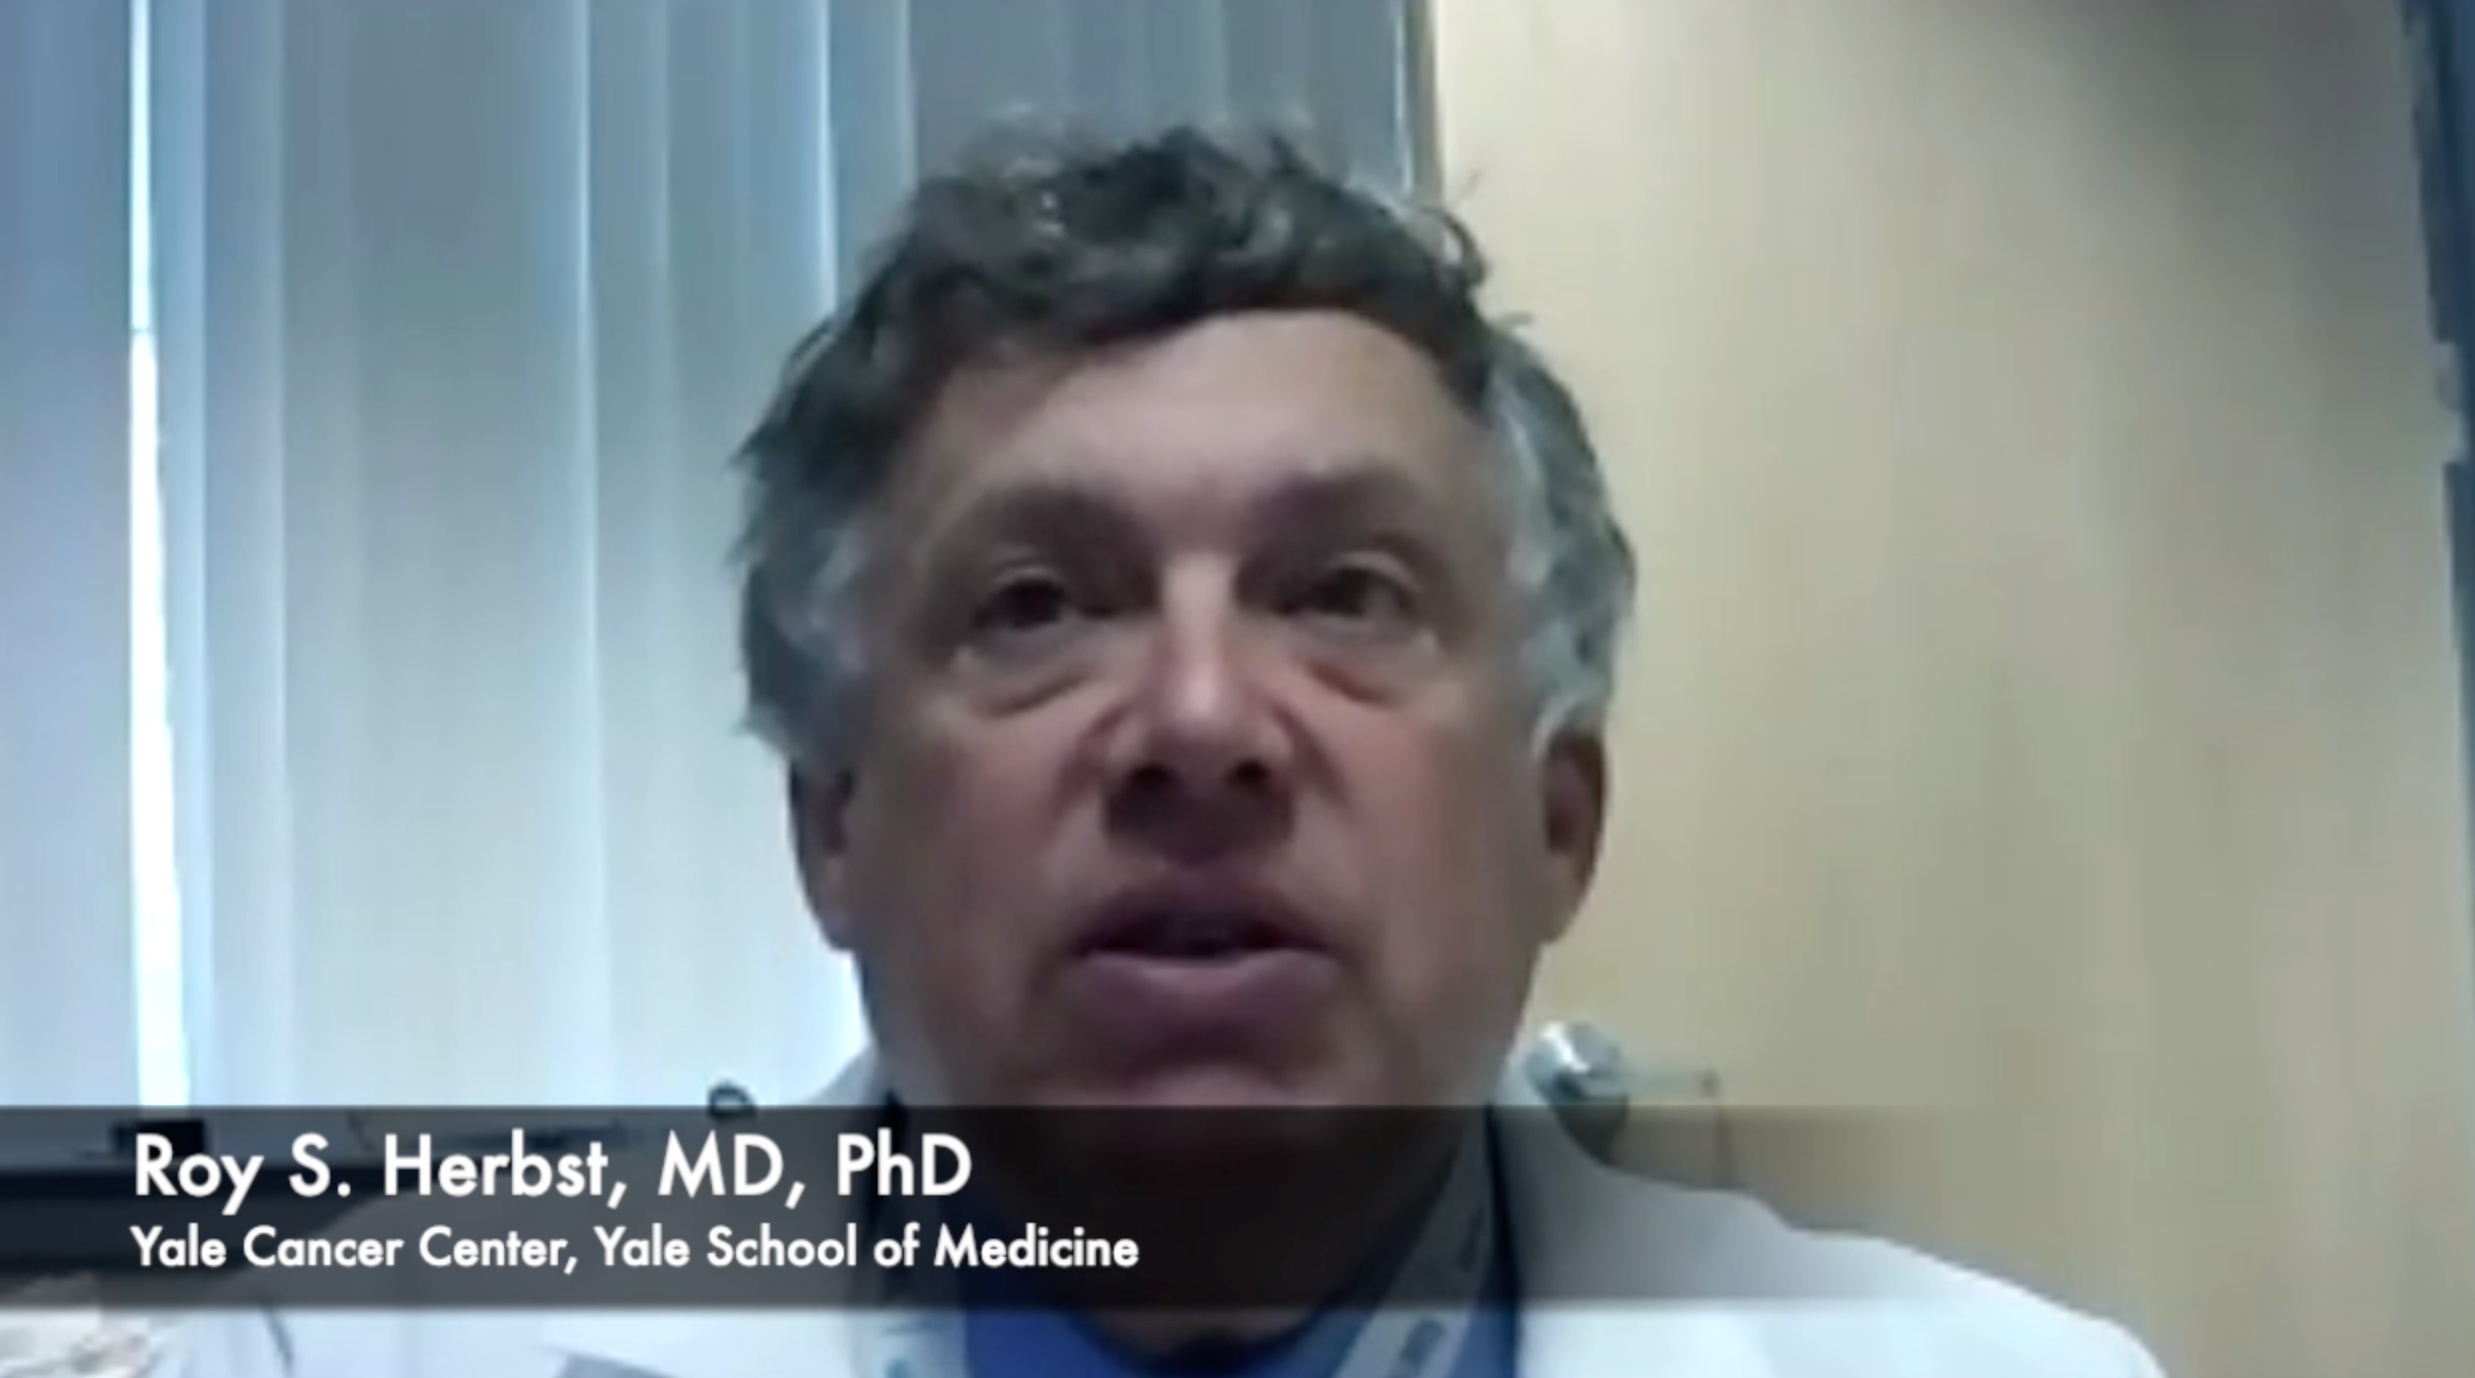 Roy S. Herbst, MD, PhD, Discusses ADAURA Trial and Future of Lung Cancer Treatment